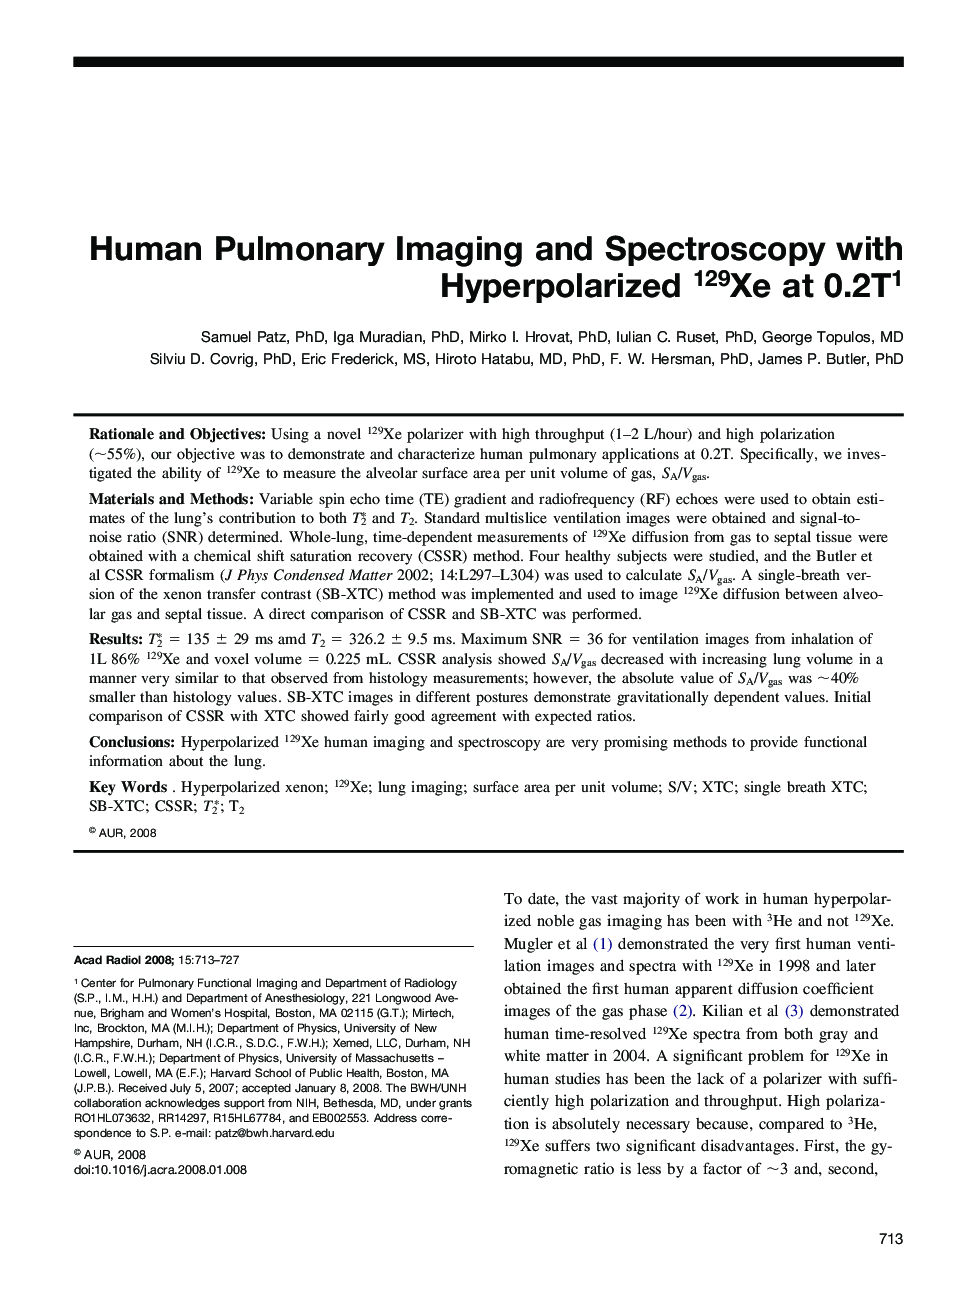 Human Pulmonary Imaging and Spectroscopy with Hyperpolarized 129Xe at 0.2T